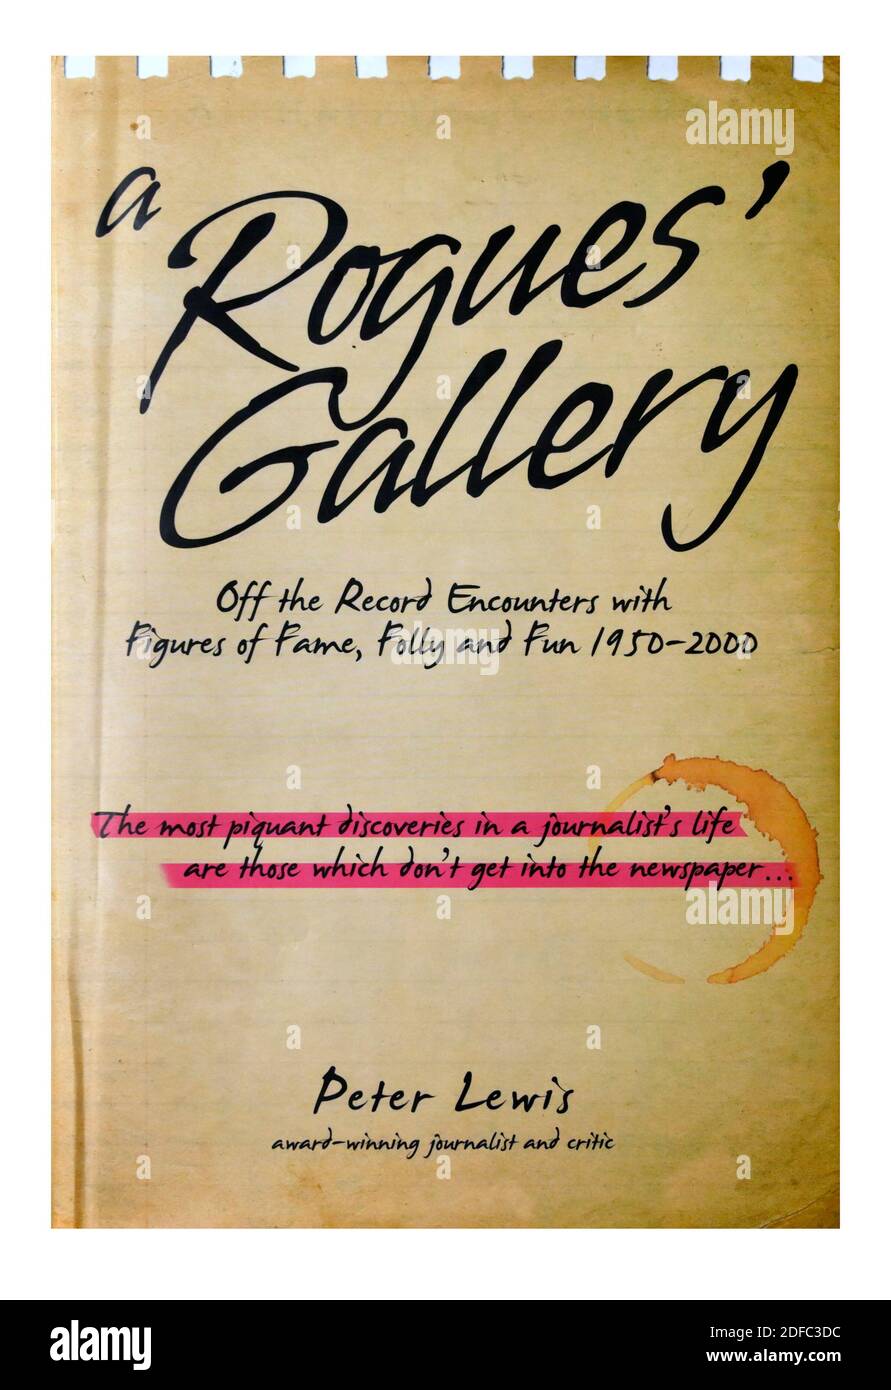 Libro copertina 'A Roges' Gallery. OFF the Record Incounters with Figures of Fame, Folly and Fun 1950-2000' di Peter Lewis. Foto Stock